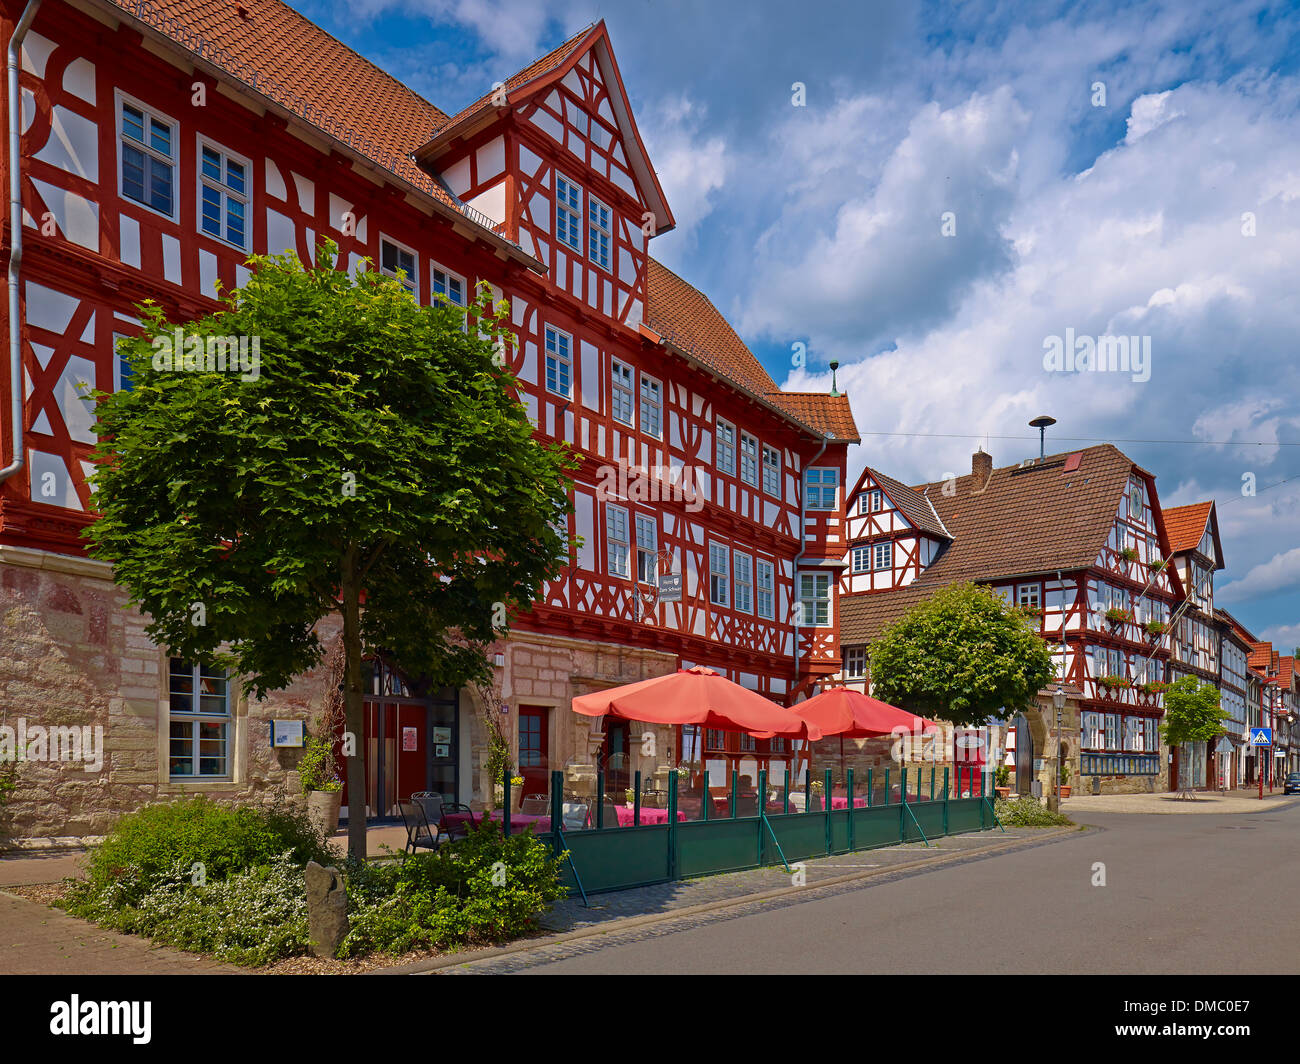 Hotel Zum Schwan and Town Hall in Wanfried, Werra-Meissner district, Hesse, Germany Stock Photo